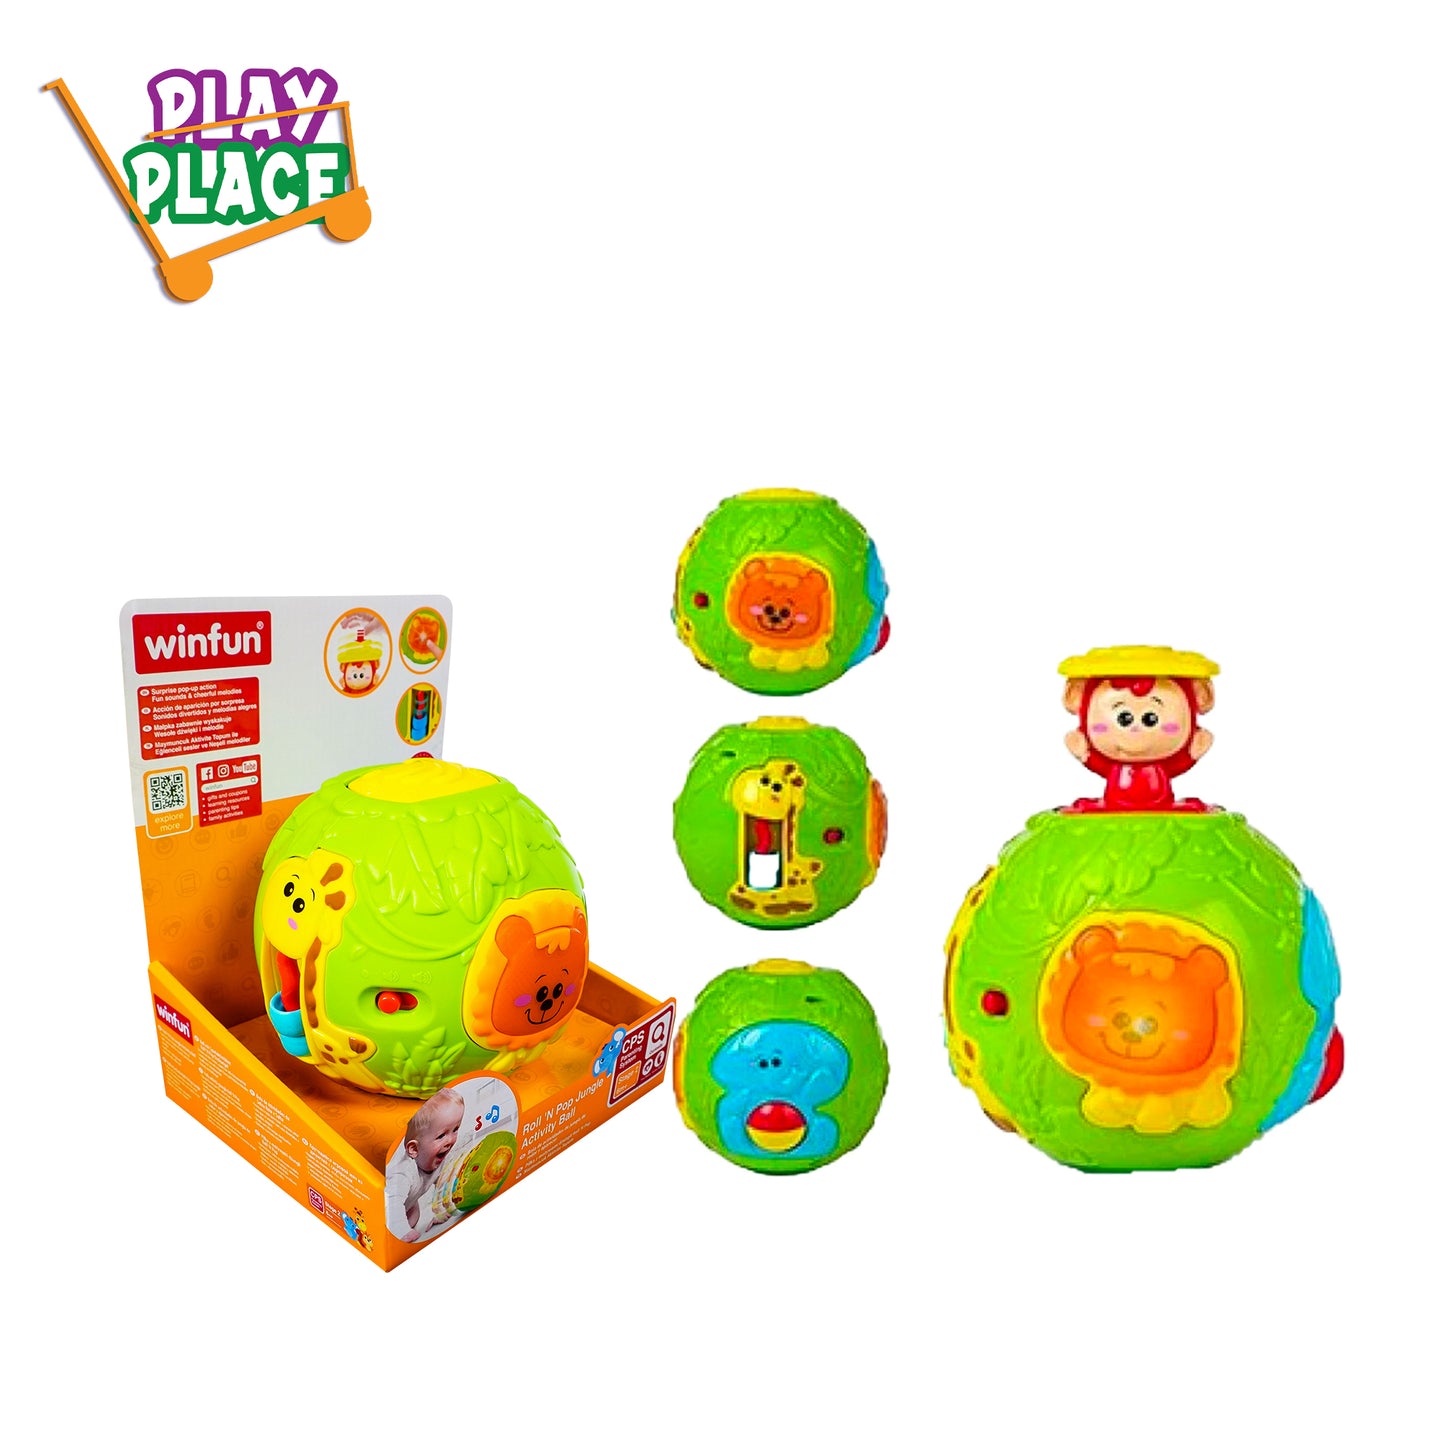 Winfun Roll ‘N Pop Jungle Activity Ball ( Stage 2 )